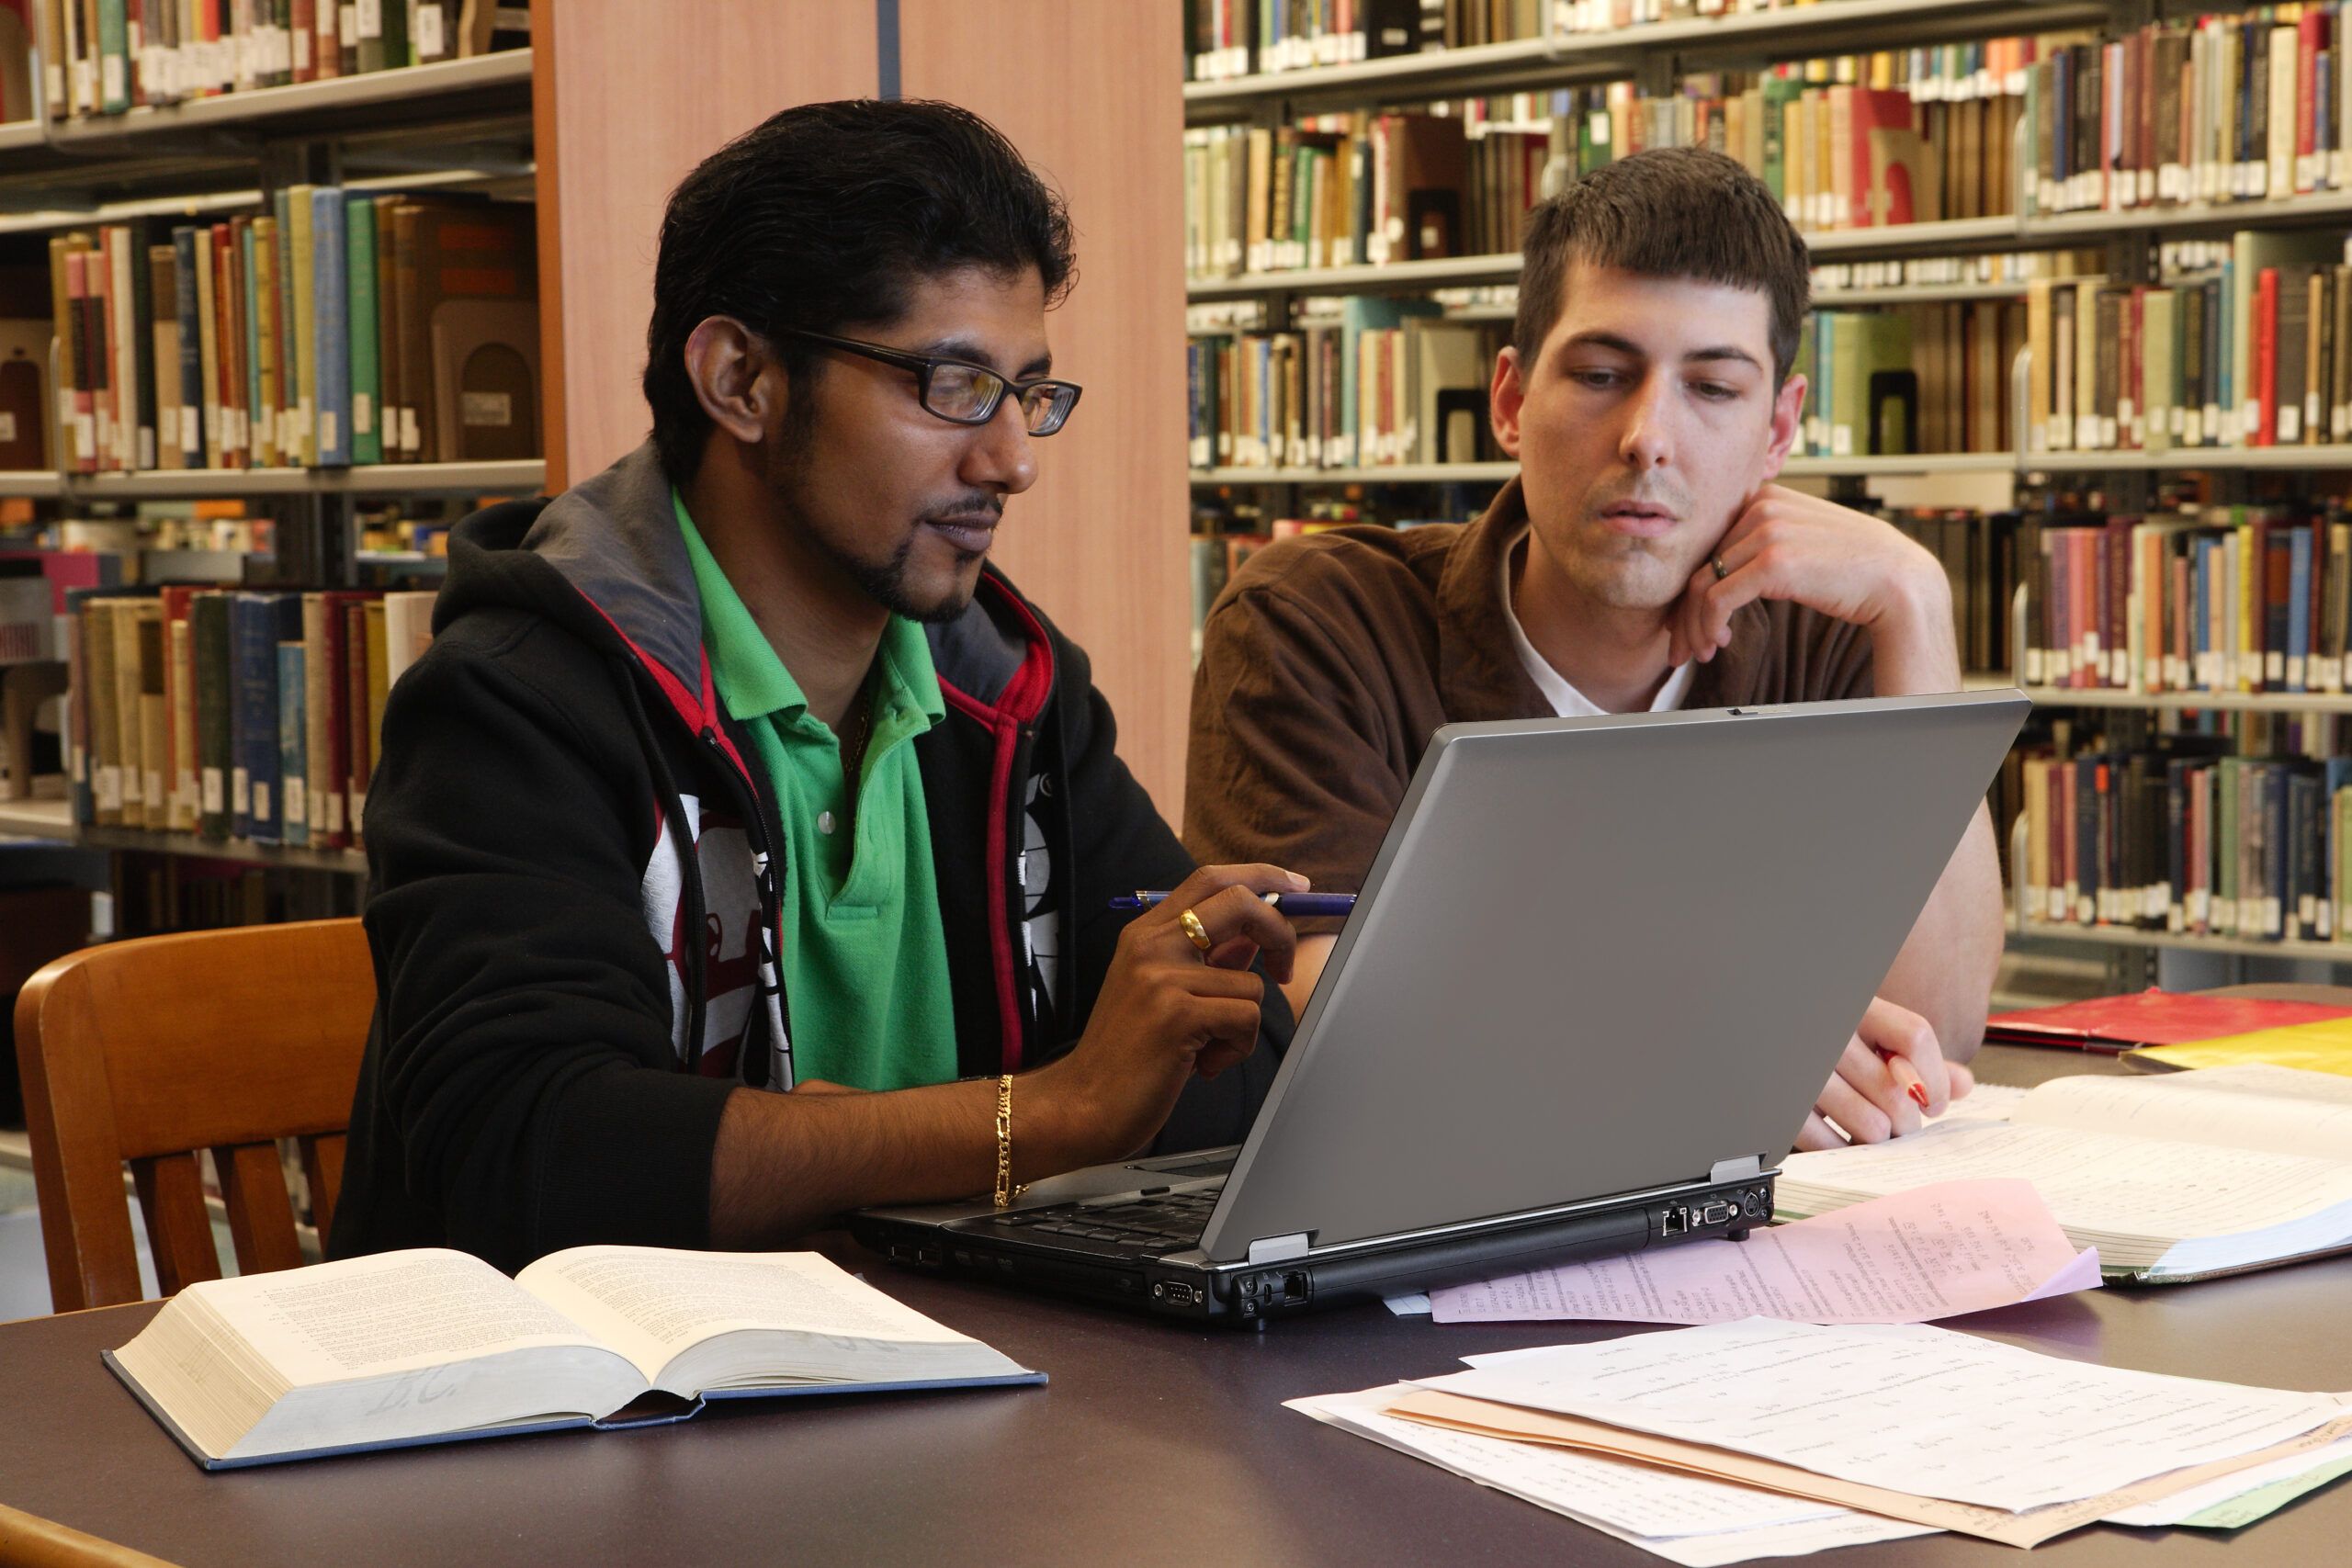 Students study at table in library